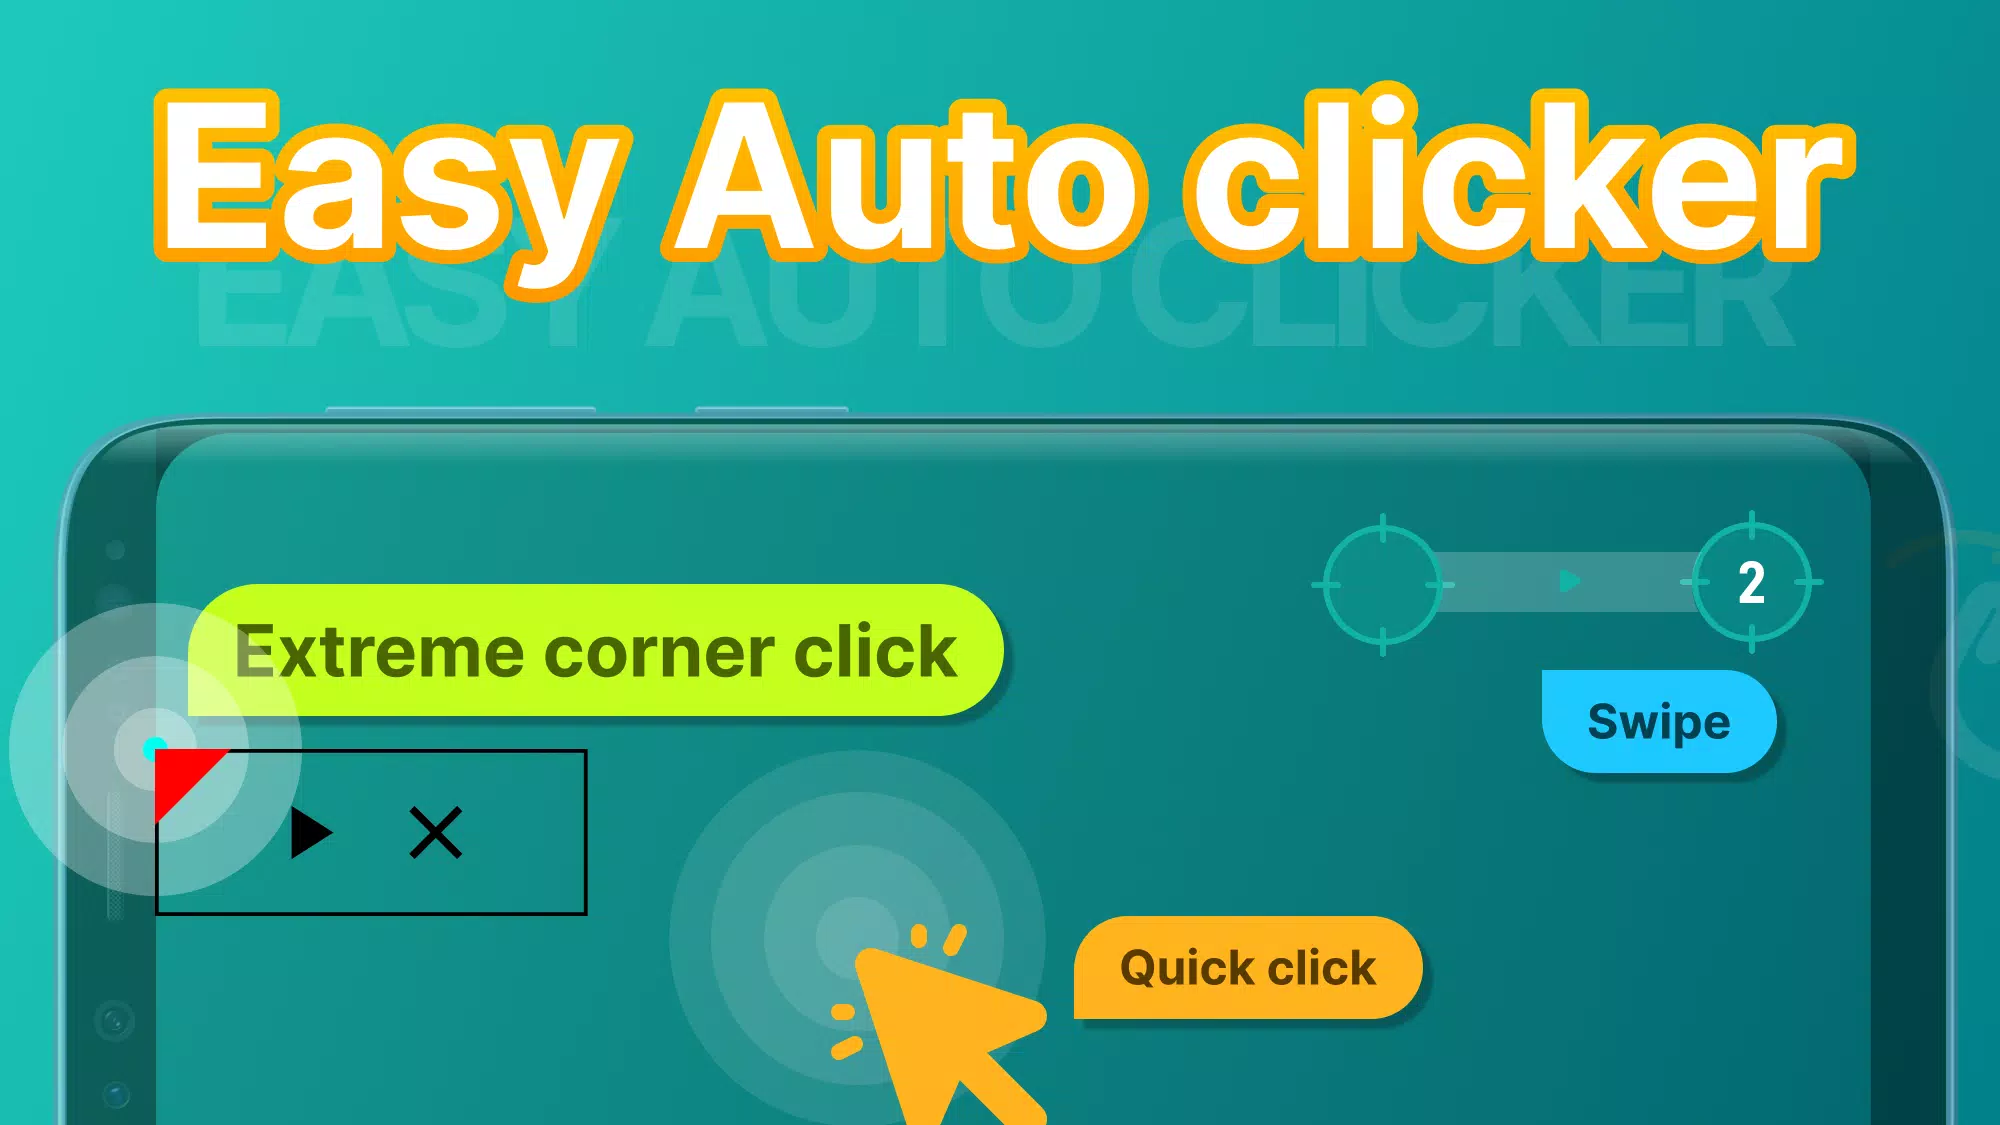 How To Get And Use OP Auto Clicker 3.0 For Roblox (Fastest Auto Clicker) 